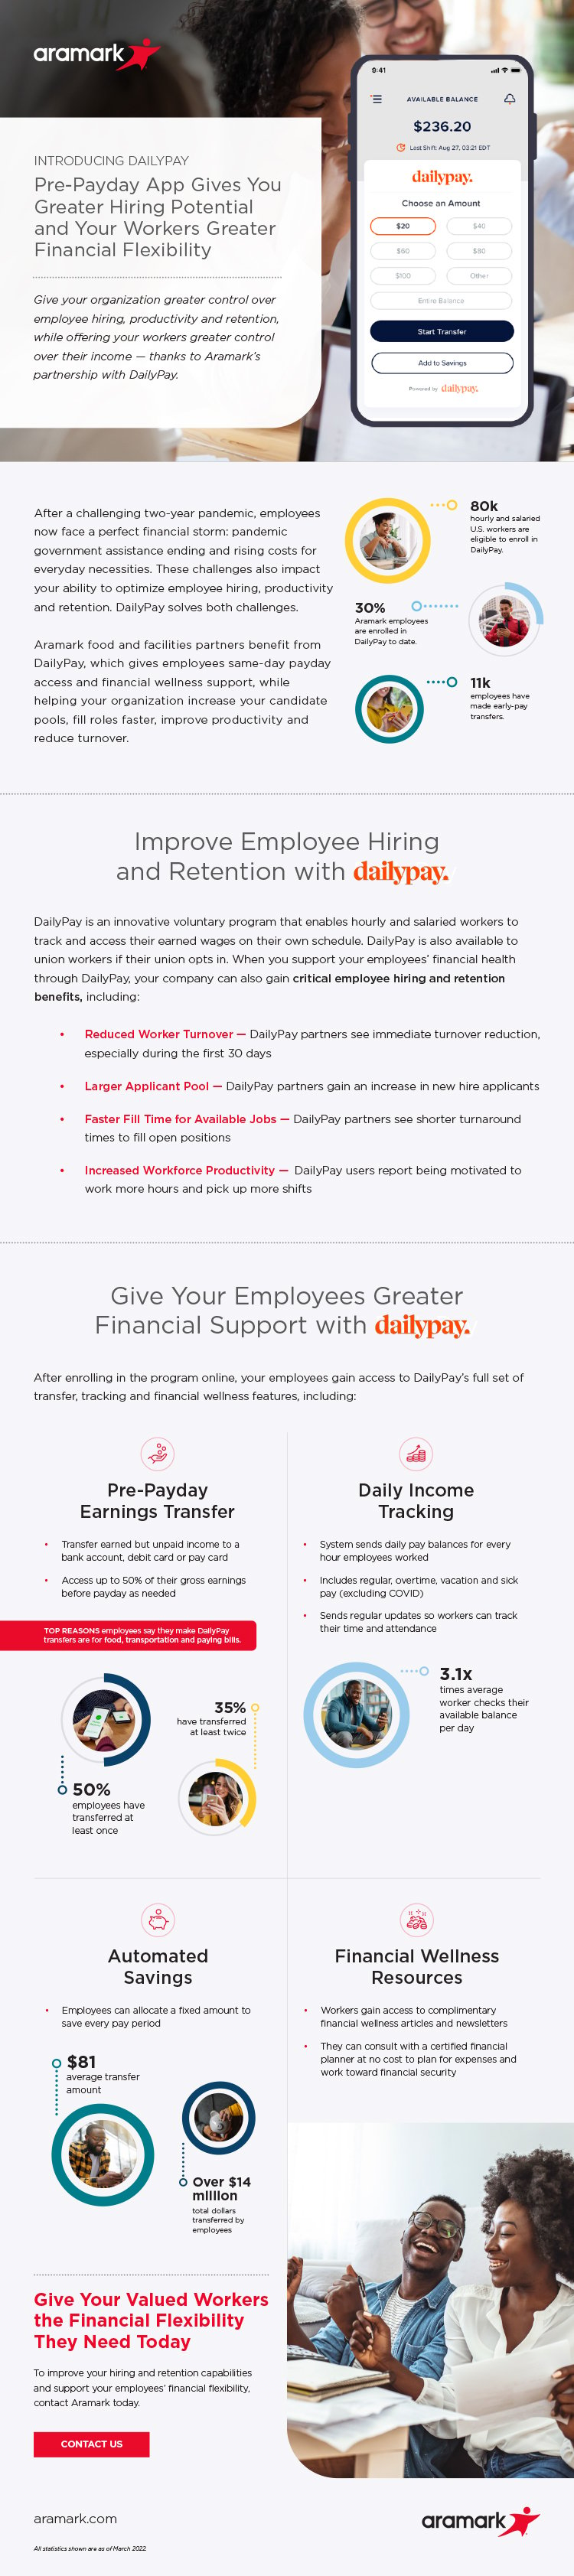 DailyPay_Infographic